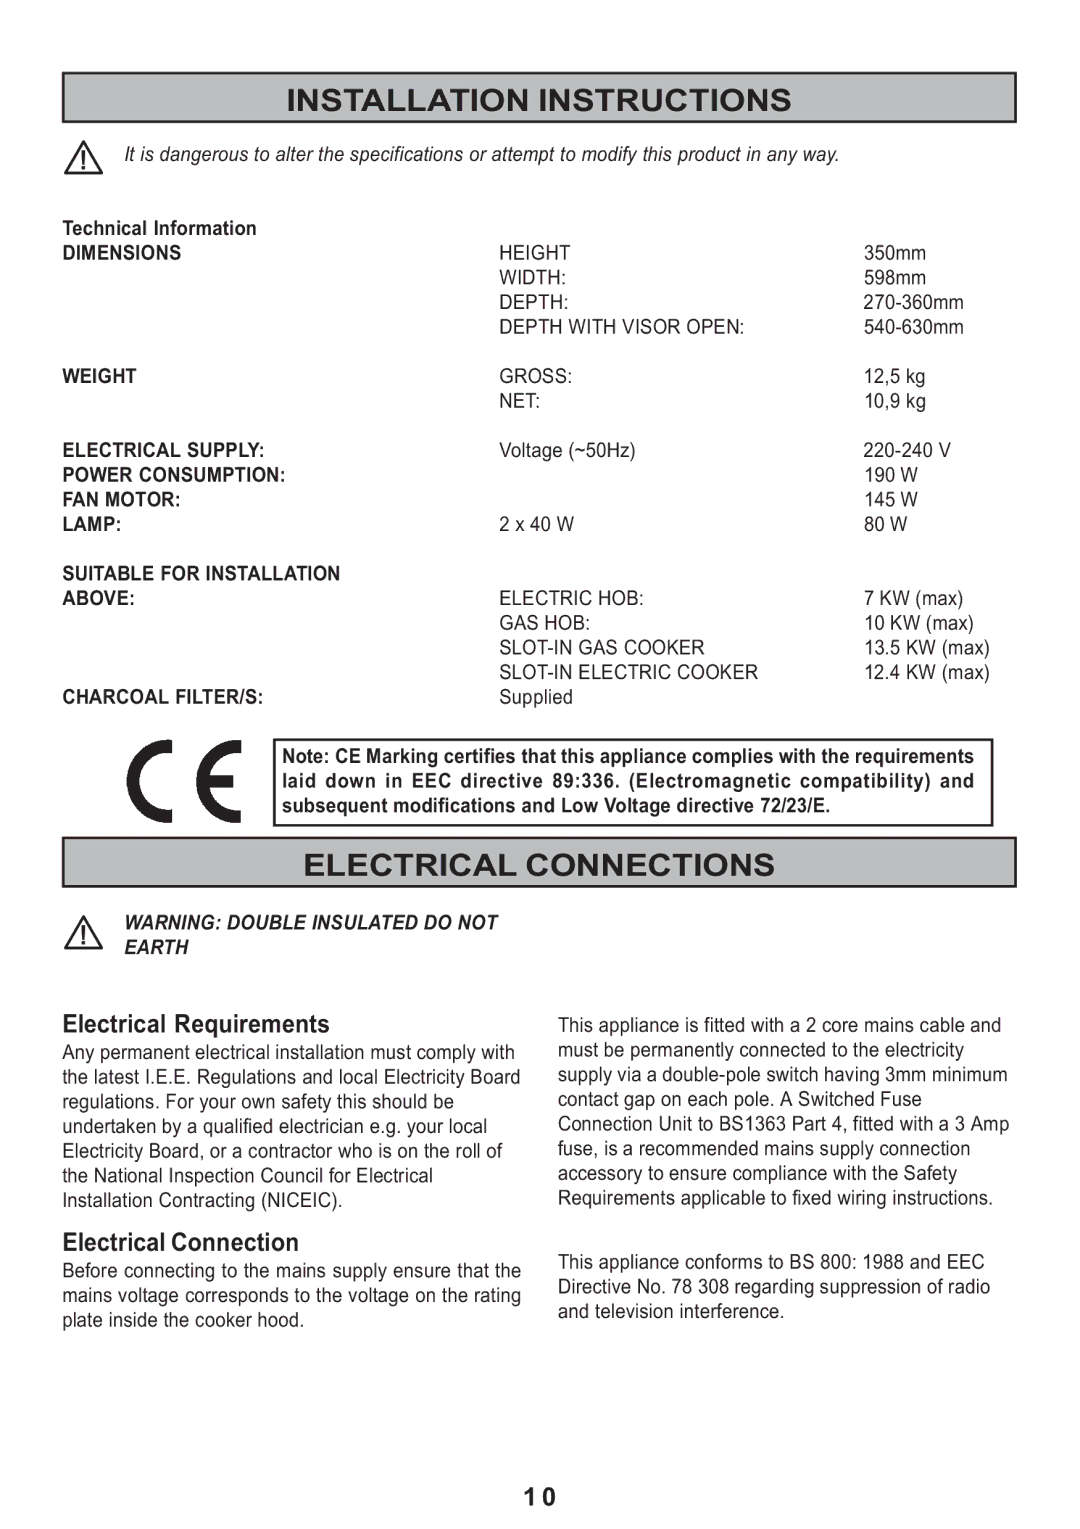 Electrolux MCH 662 manual Installation Instructions, Electrical Connections, Electrical Requirements 